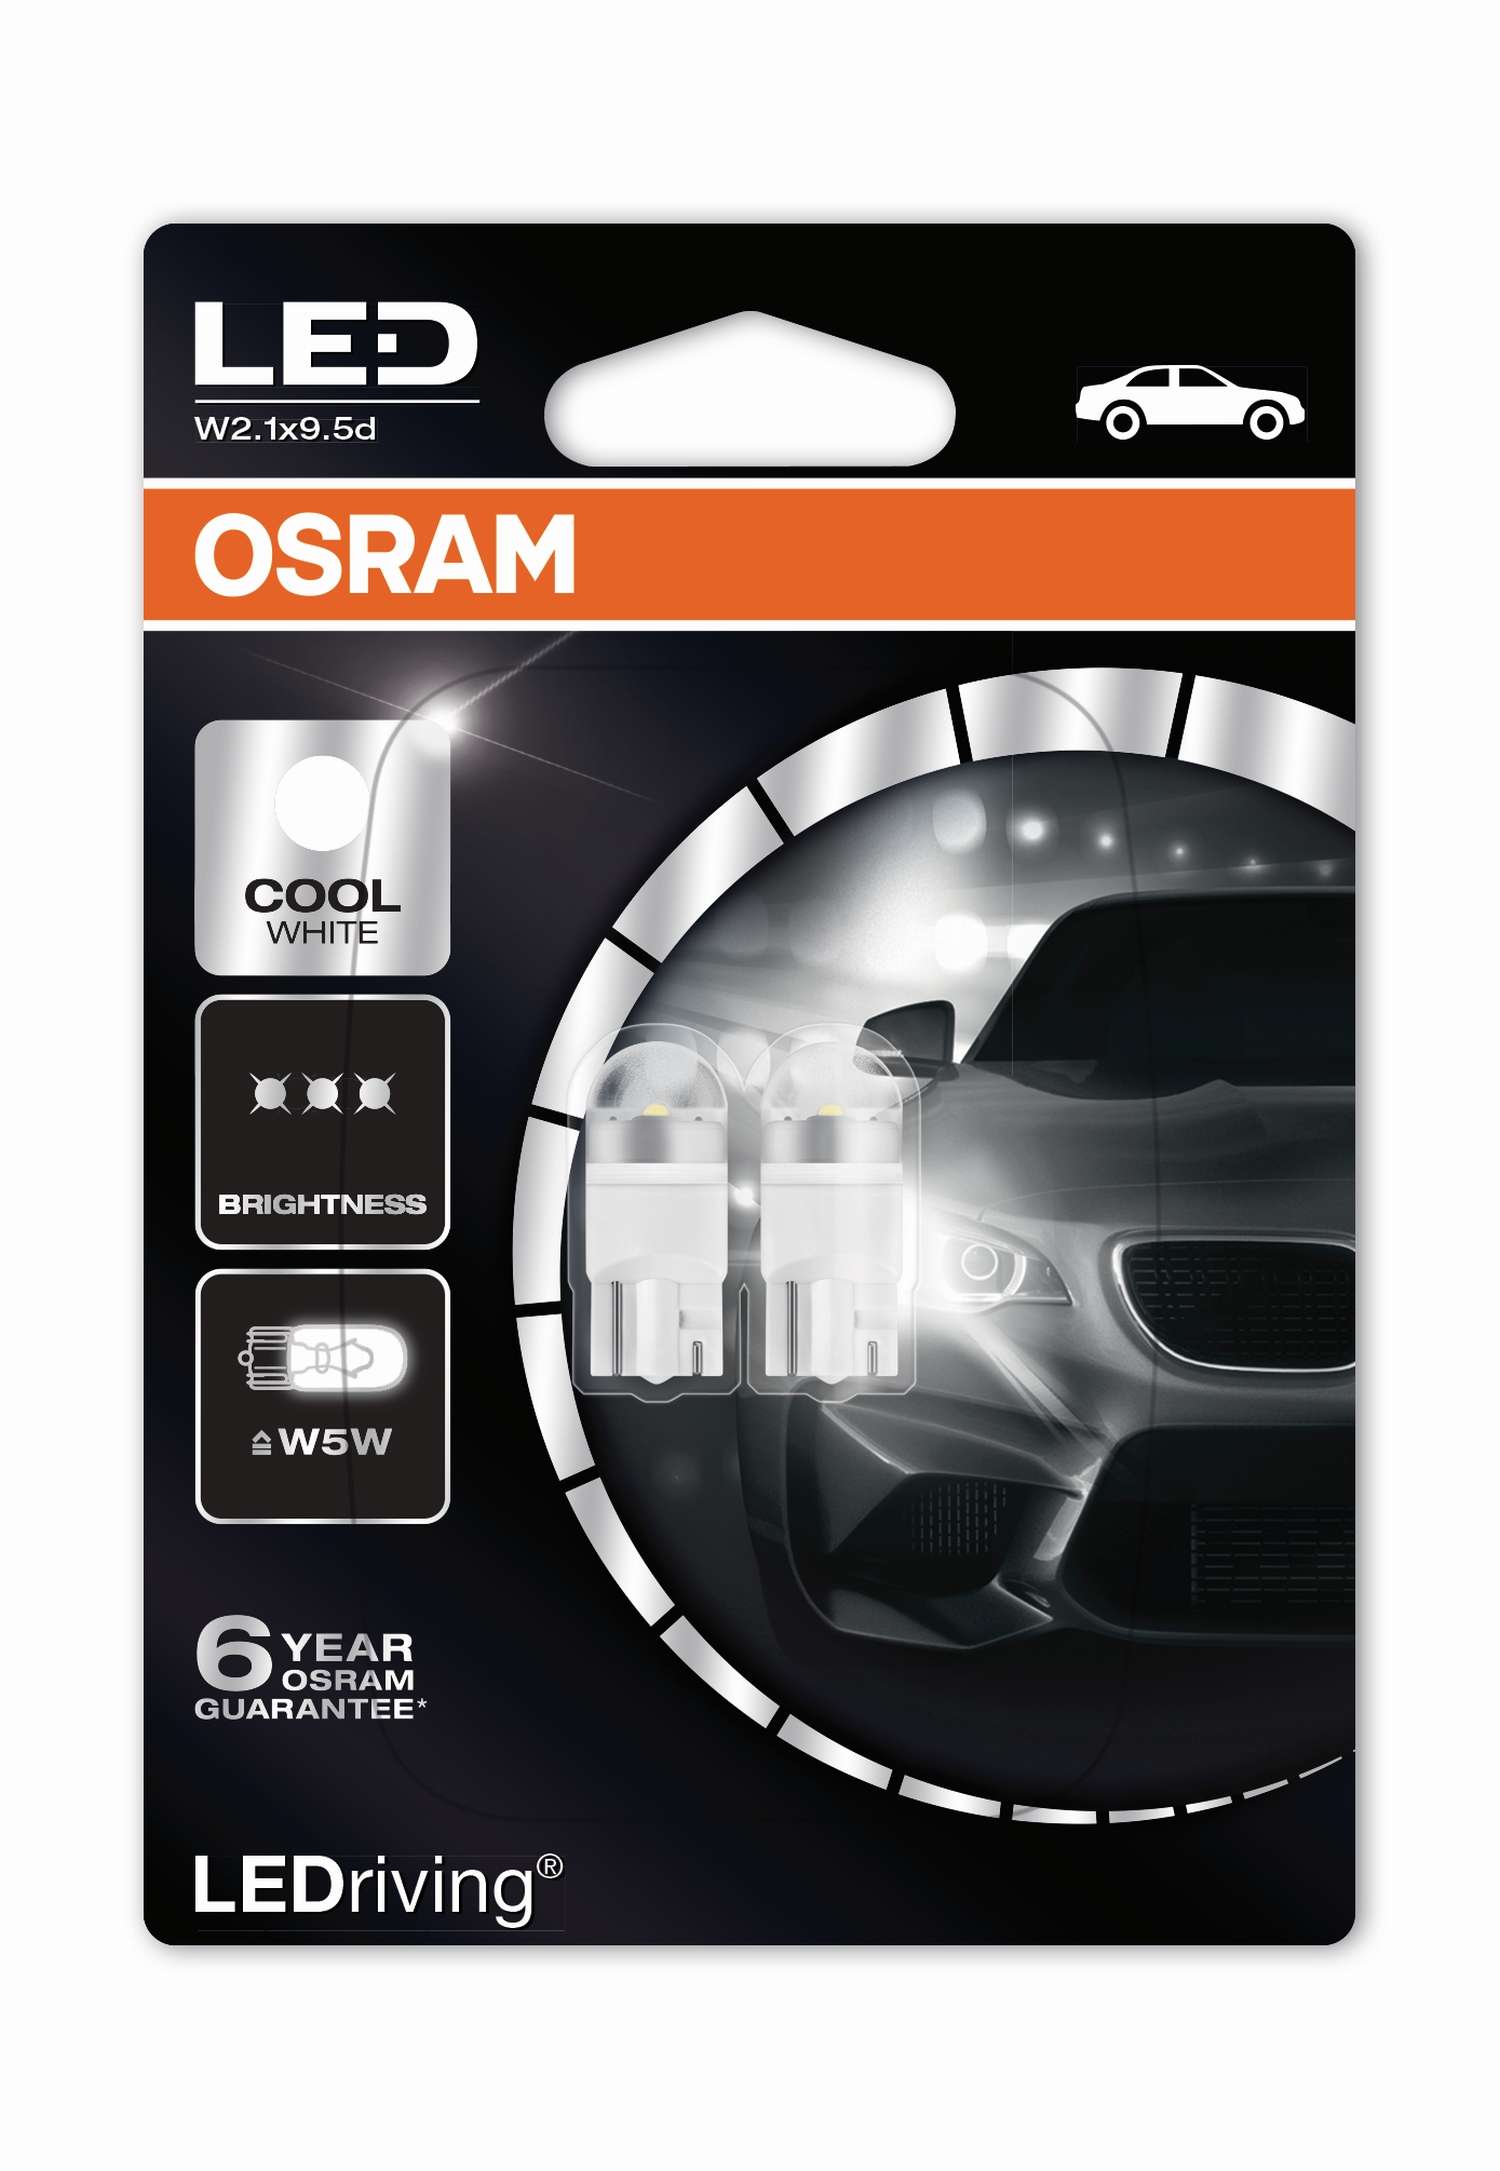 relieve to donate Solve W5W 12V 1W W2.1x9.5d LED riving Cool White 6000K 2st. OSRAM - Auto-Lamp  Berlin